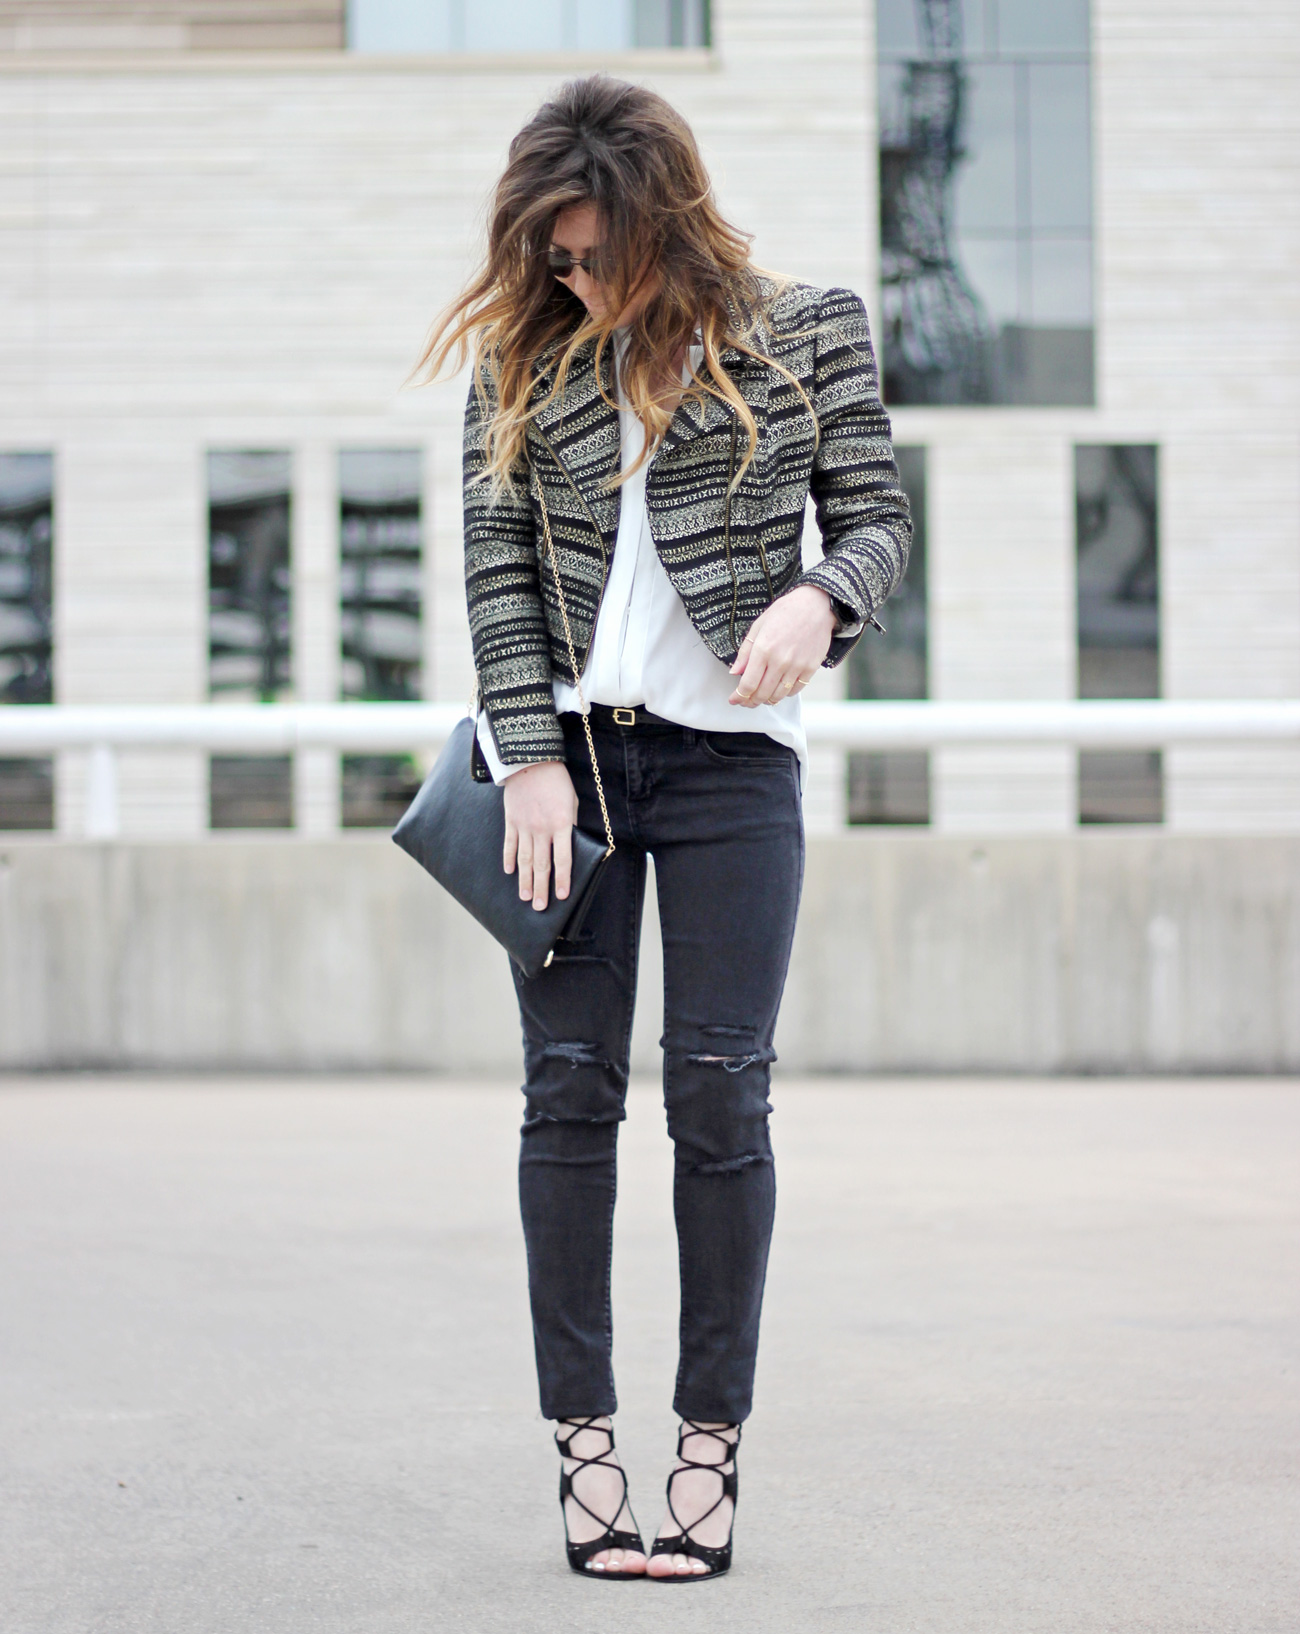 Statement Jacket – Only If You Love It